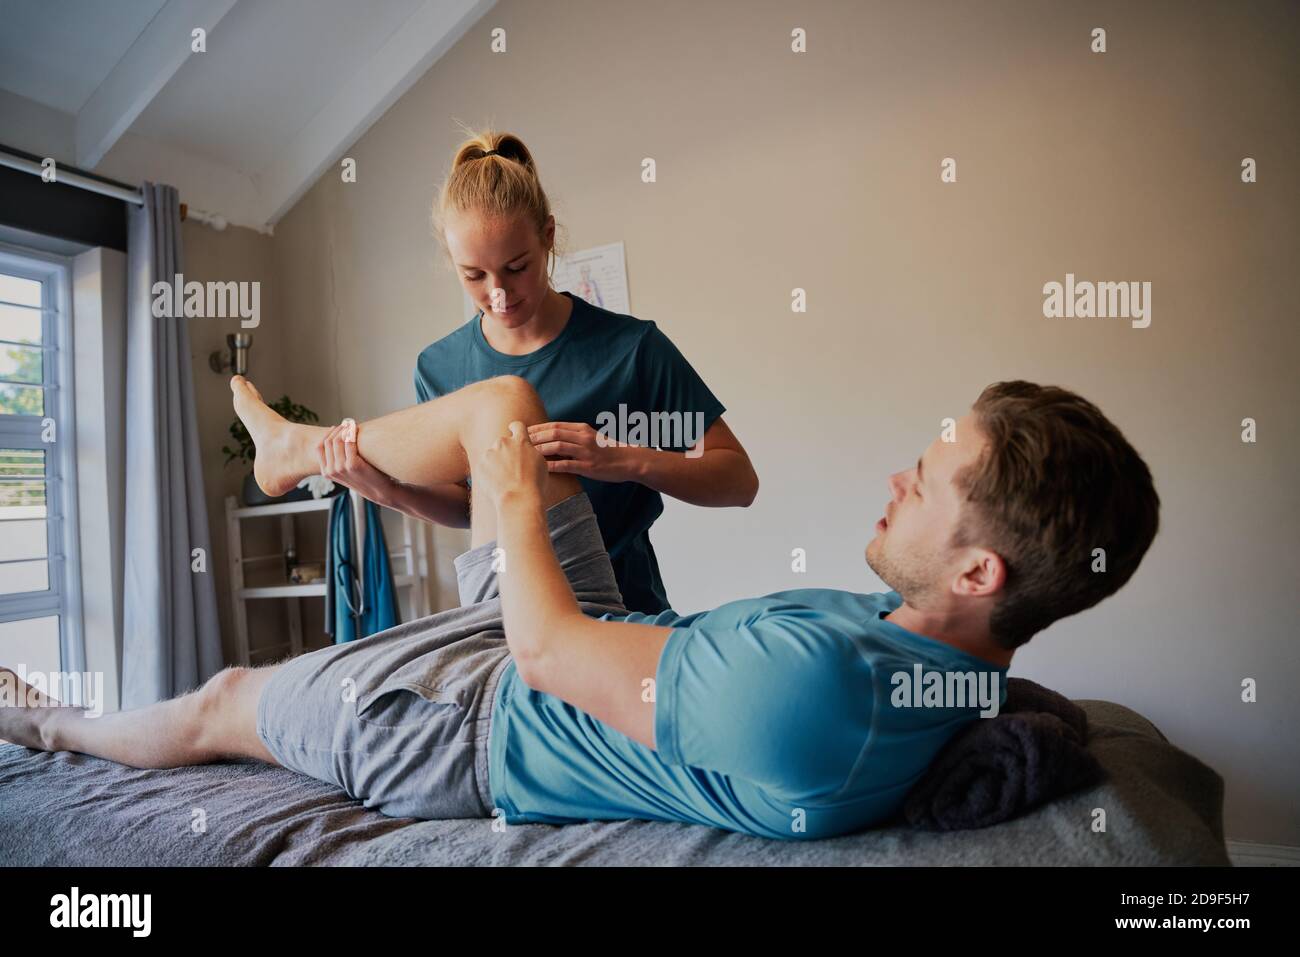 Young man lying on hospital bed showing joint pain position to young woman physiotherapist Stock Photo